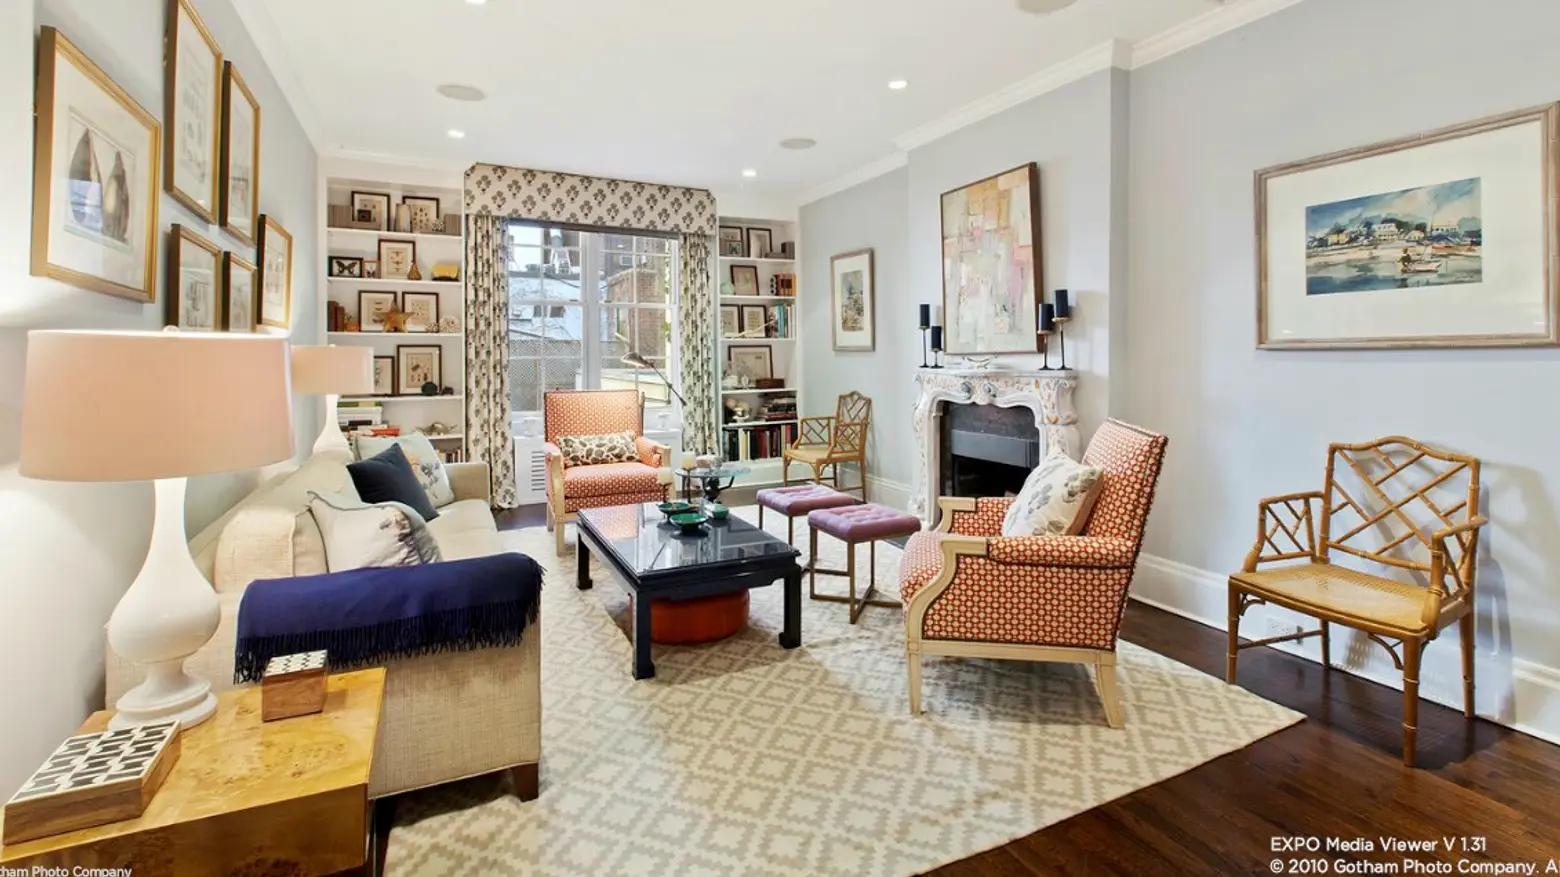 259 East 78th Street, Cool Listings, Townhouse, Upper East Side, Manhattan Townhouse for sale